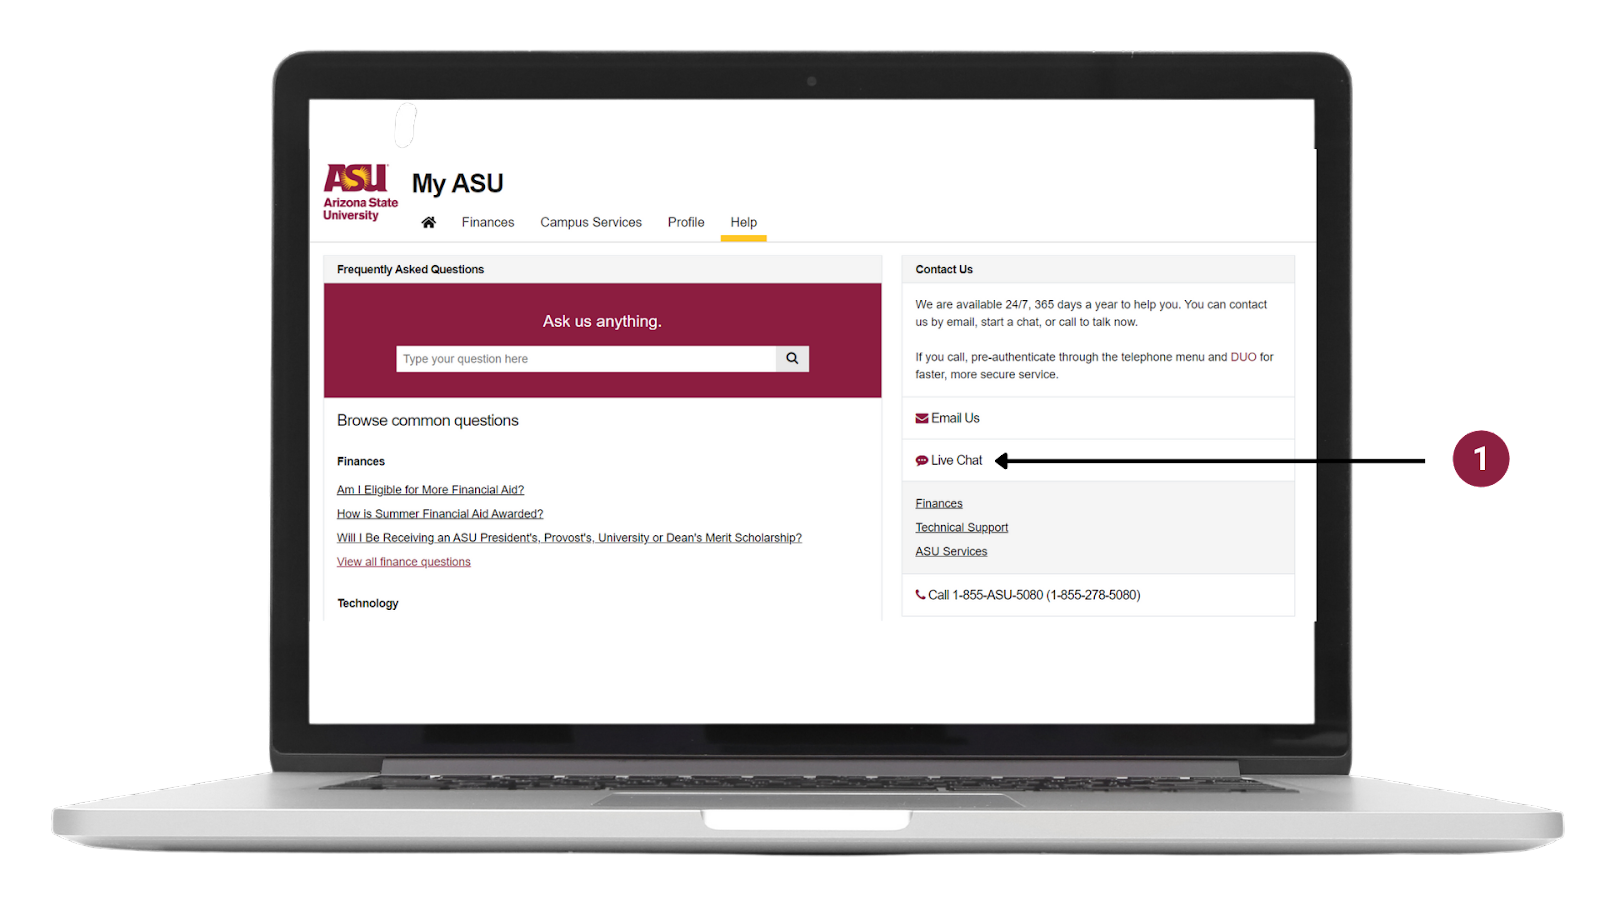 Any student who wishes to use the chatbot can view âHelpâ from their âFinancesâ tab in My ASU and select âLive Chatâ (image 1 above).